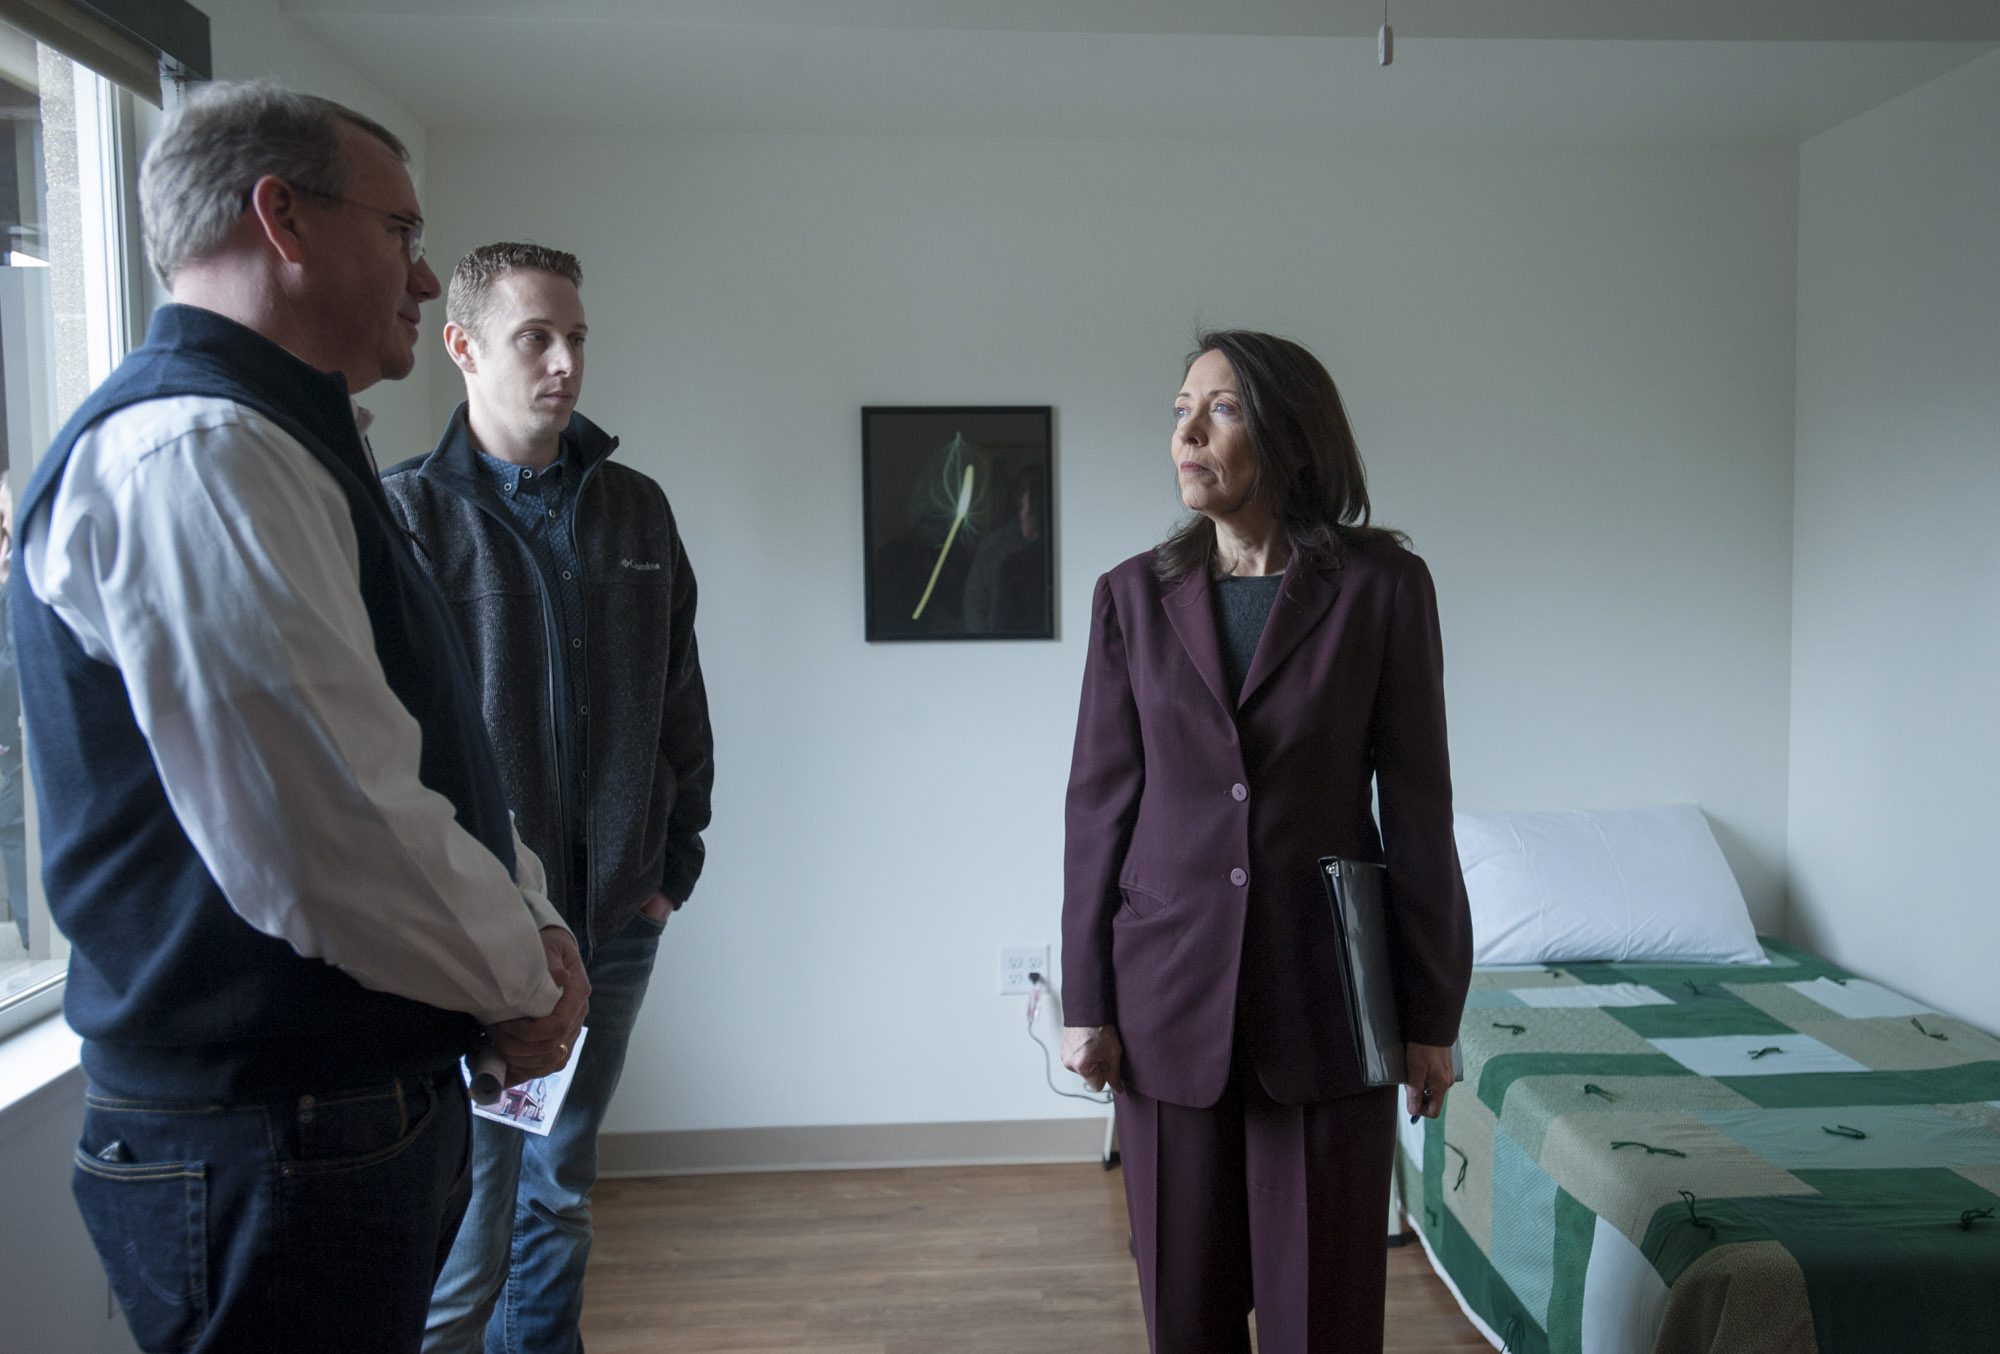 Sen. Maria Cantwell, D-Wash., talks to Dave Gunsul, President of Team Construction, left, and Ryan Dooley as she tours the soon-to-open Lincoln Place in downtown Vancouver, a 30-unit studio apartment complex for chronically homeless people.